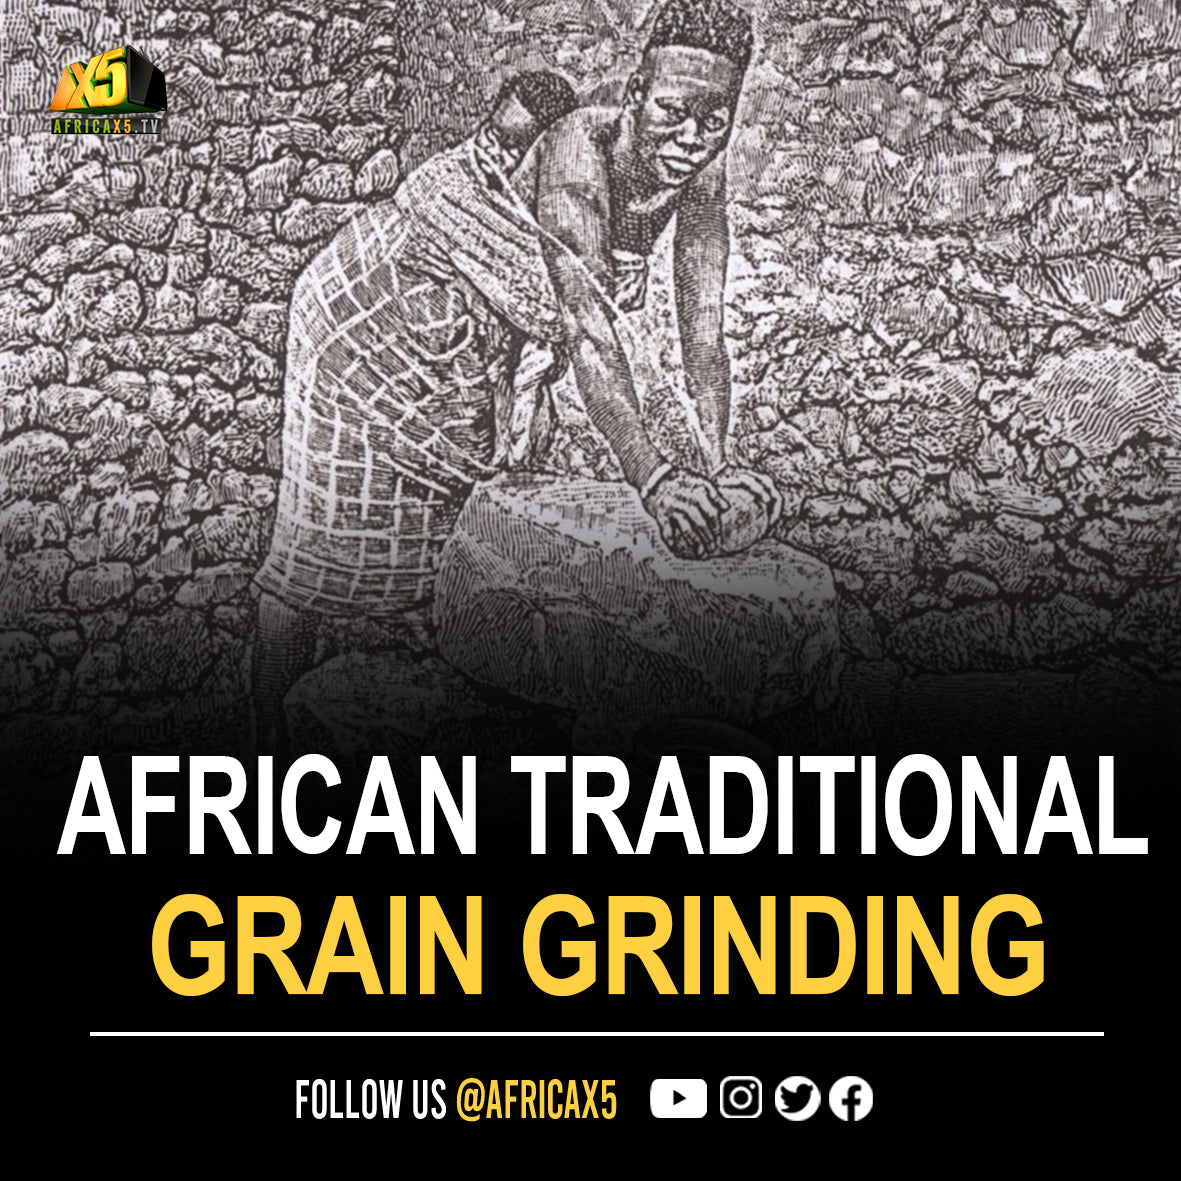 TRADITIONAL AFRICAN GRAIN GRINDING